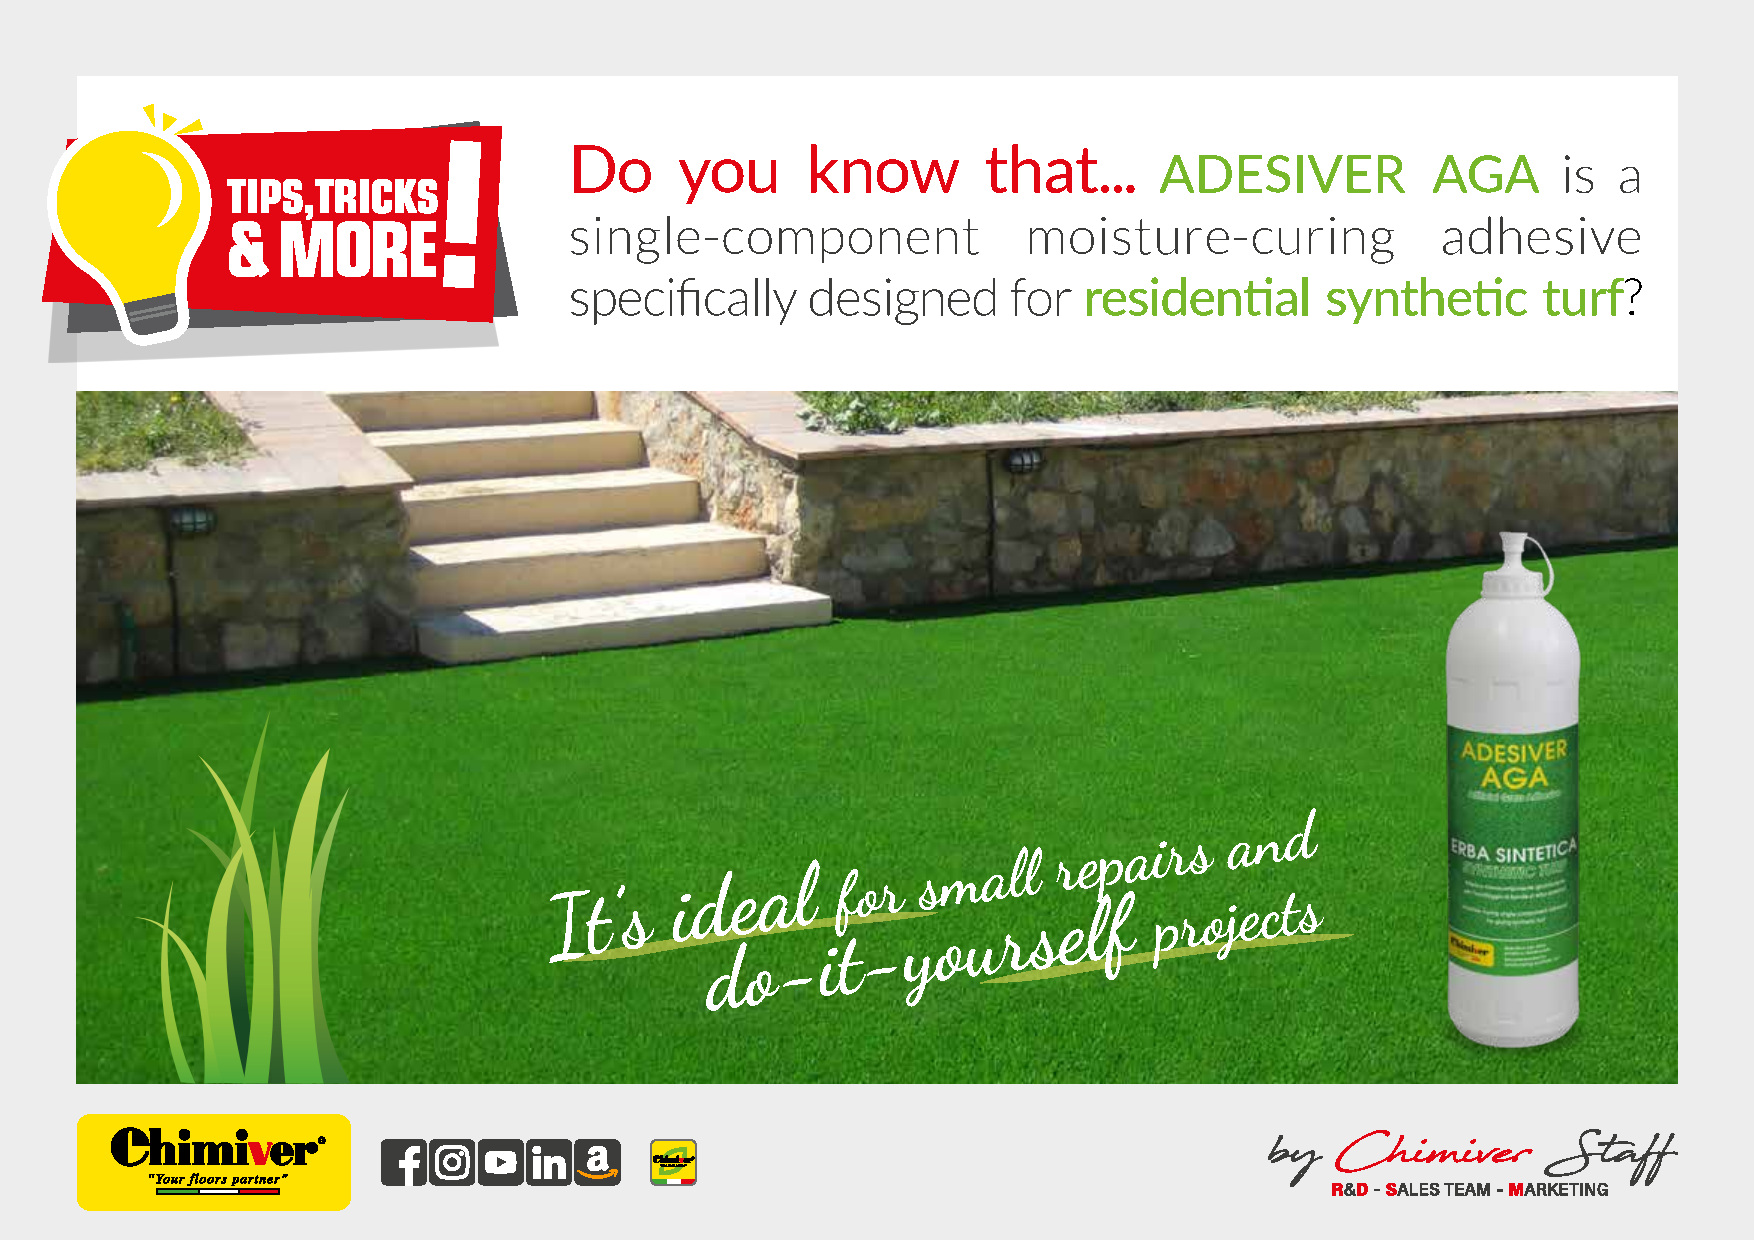 Do you know that… ADESIVER AGA is a single-component moisture-curing adhesive specifically designed for residential synthetic turf?